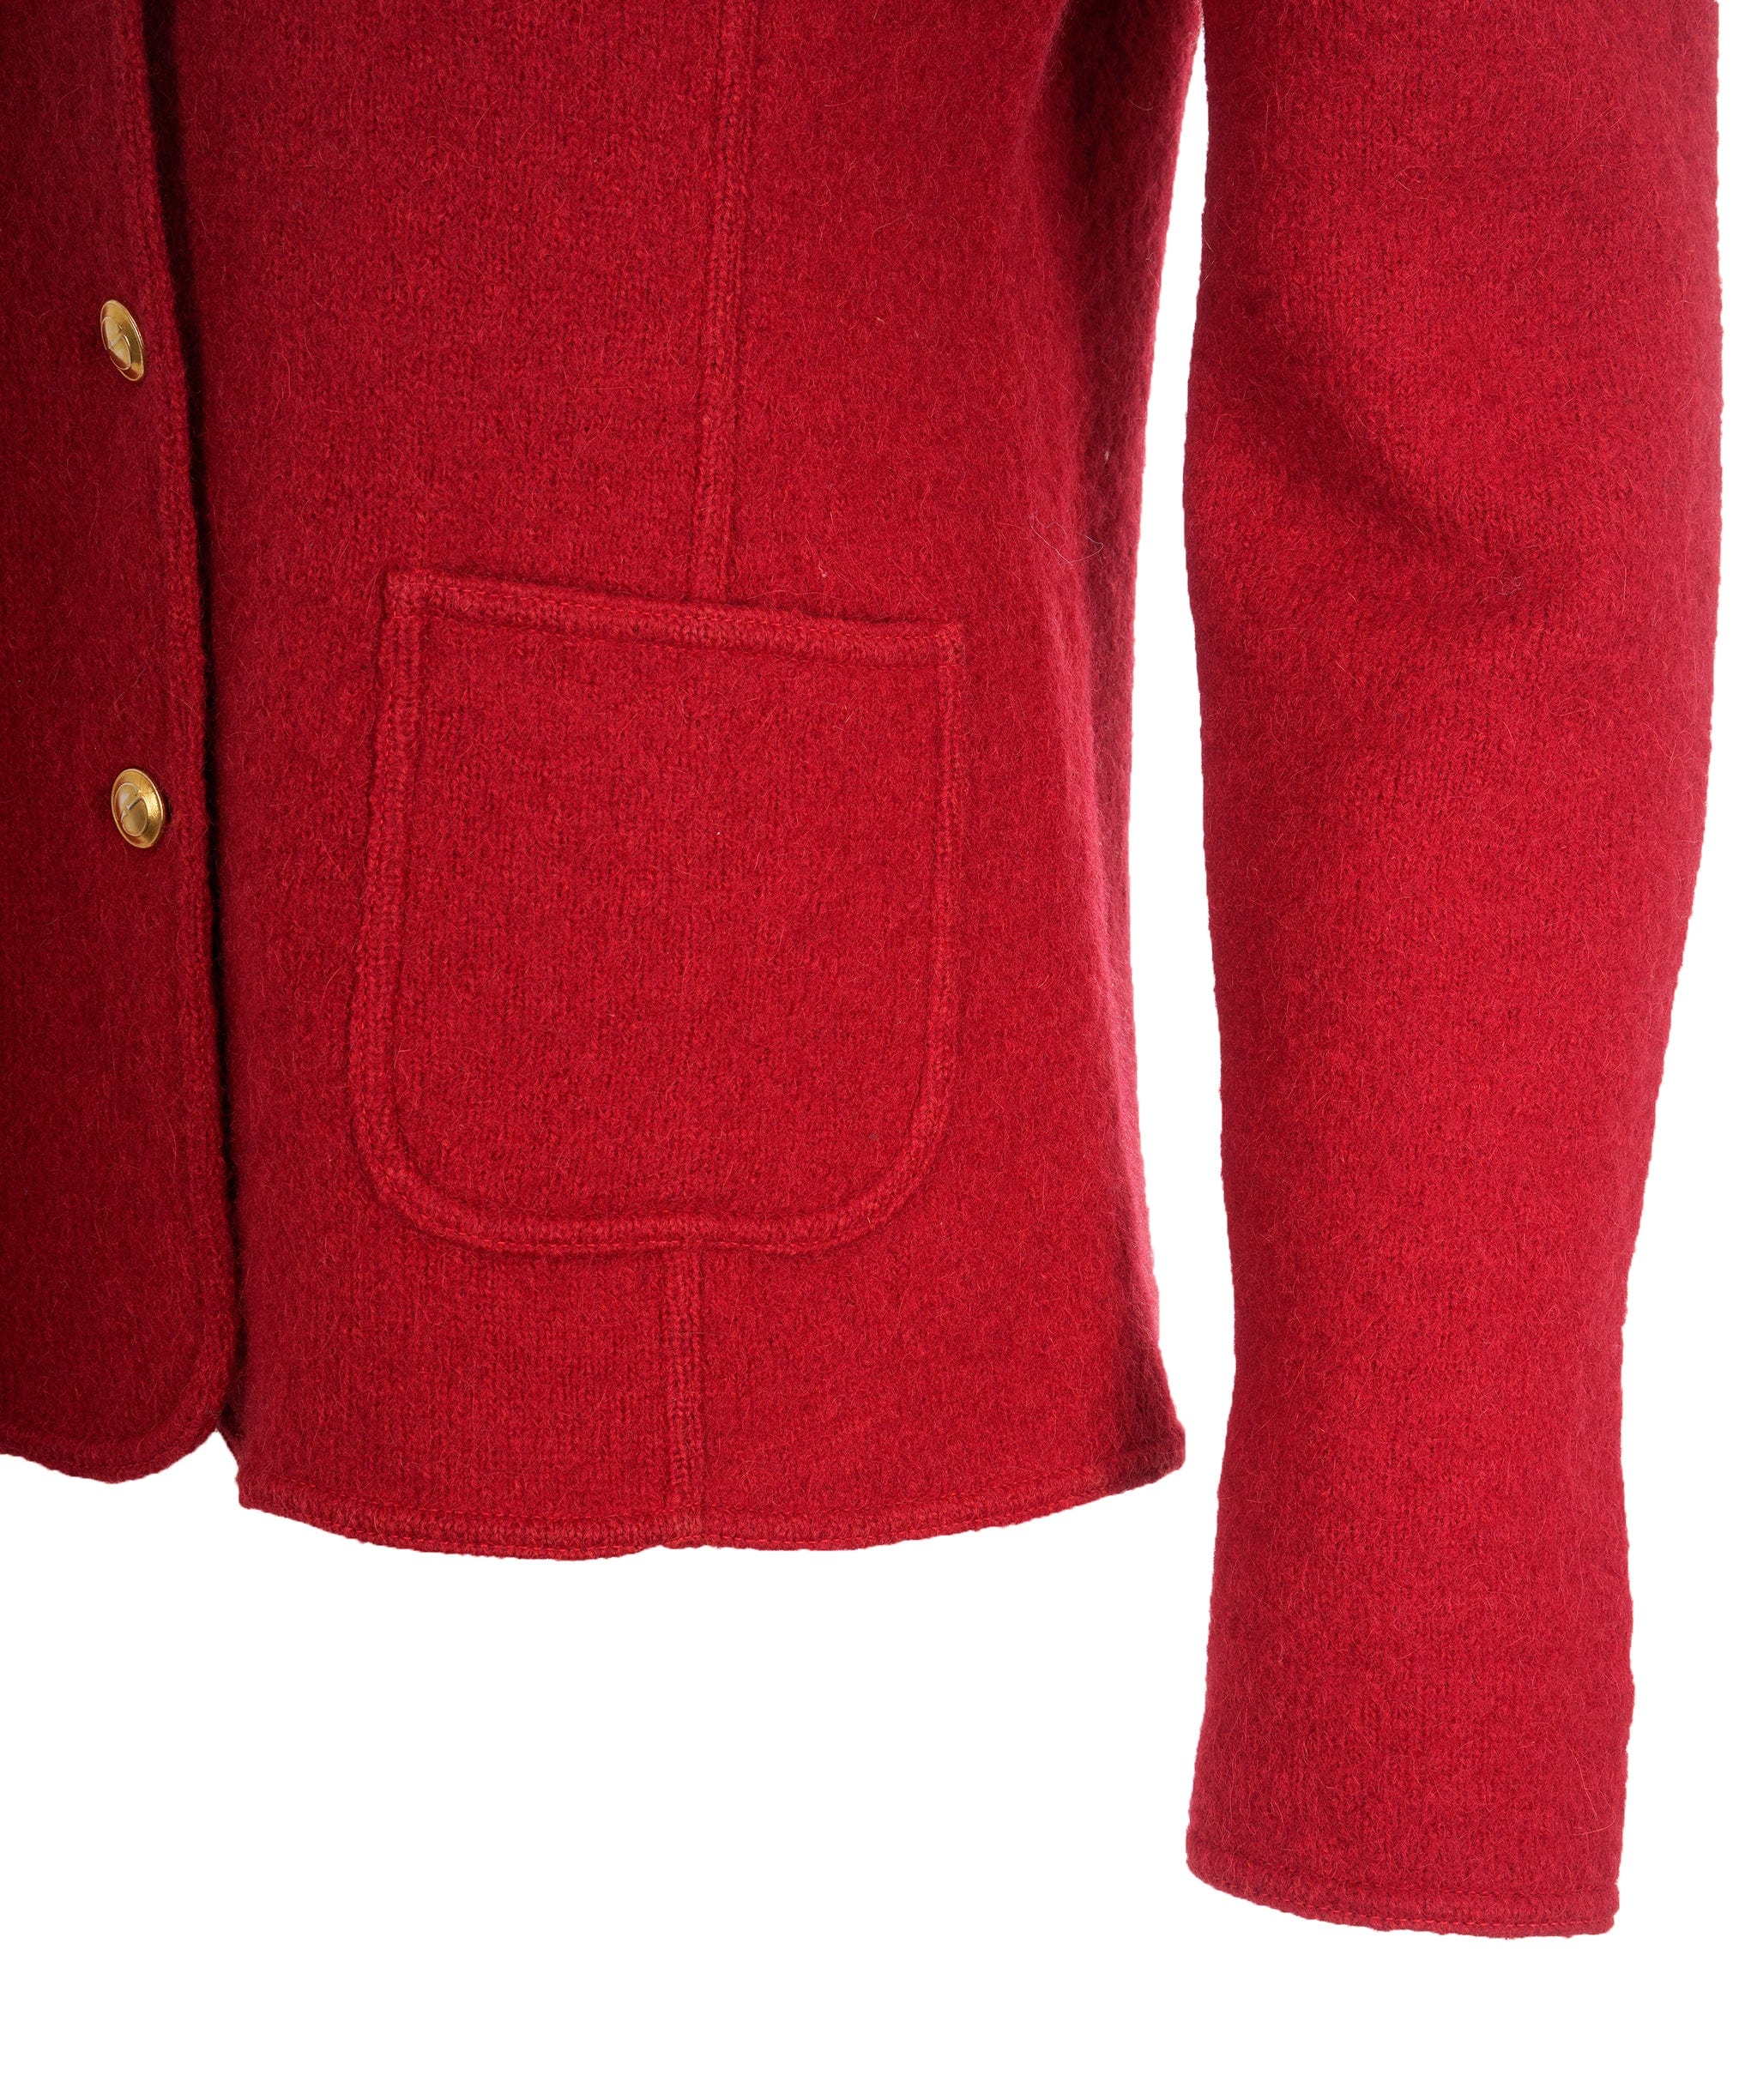 Gucci Gucci red wool coat with gold buttons - AJC0470